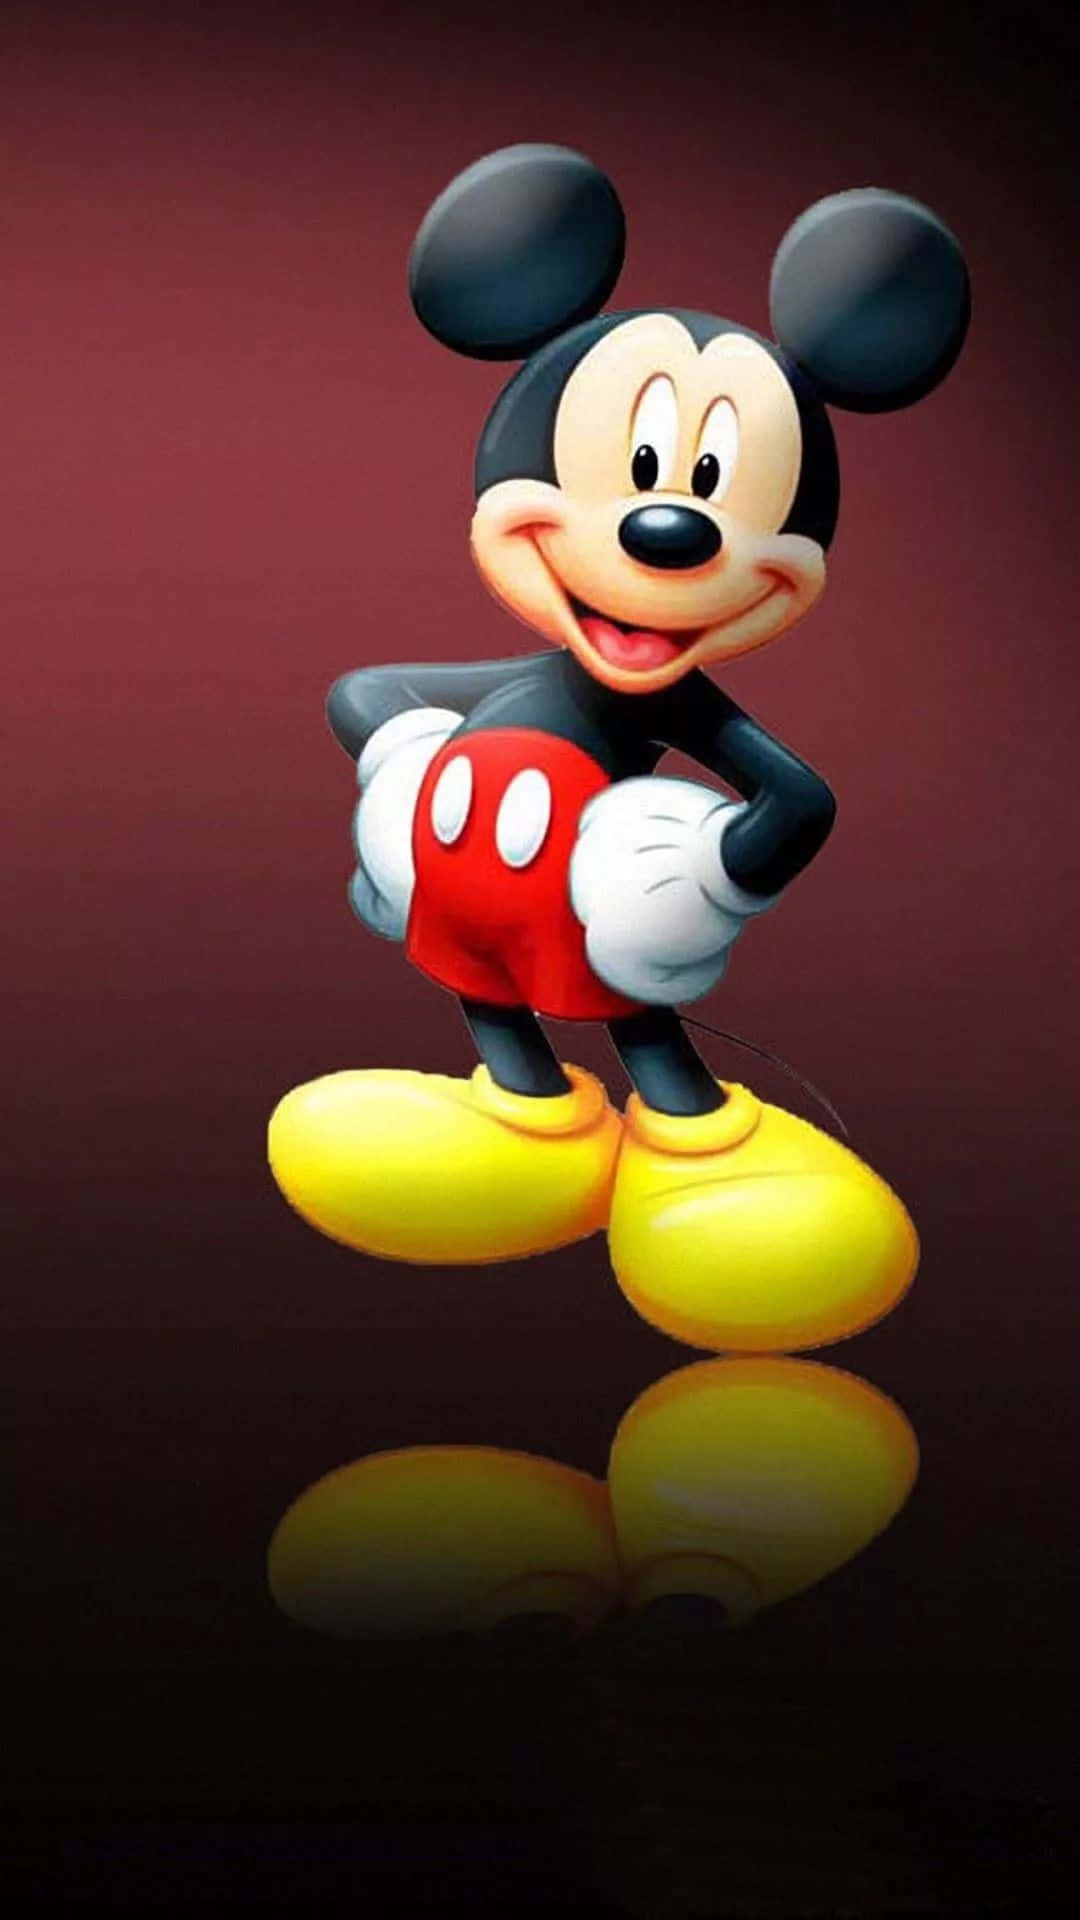 Enjoy a day of fun in the magical Mickey Mouse Home Wallpaper